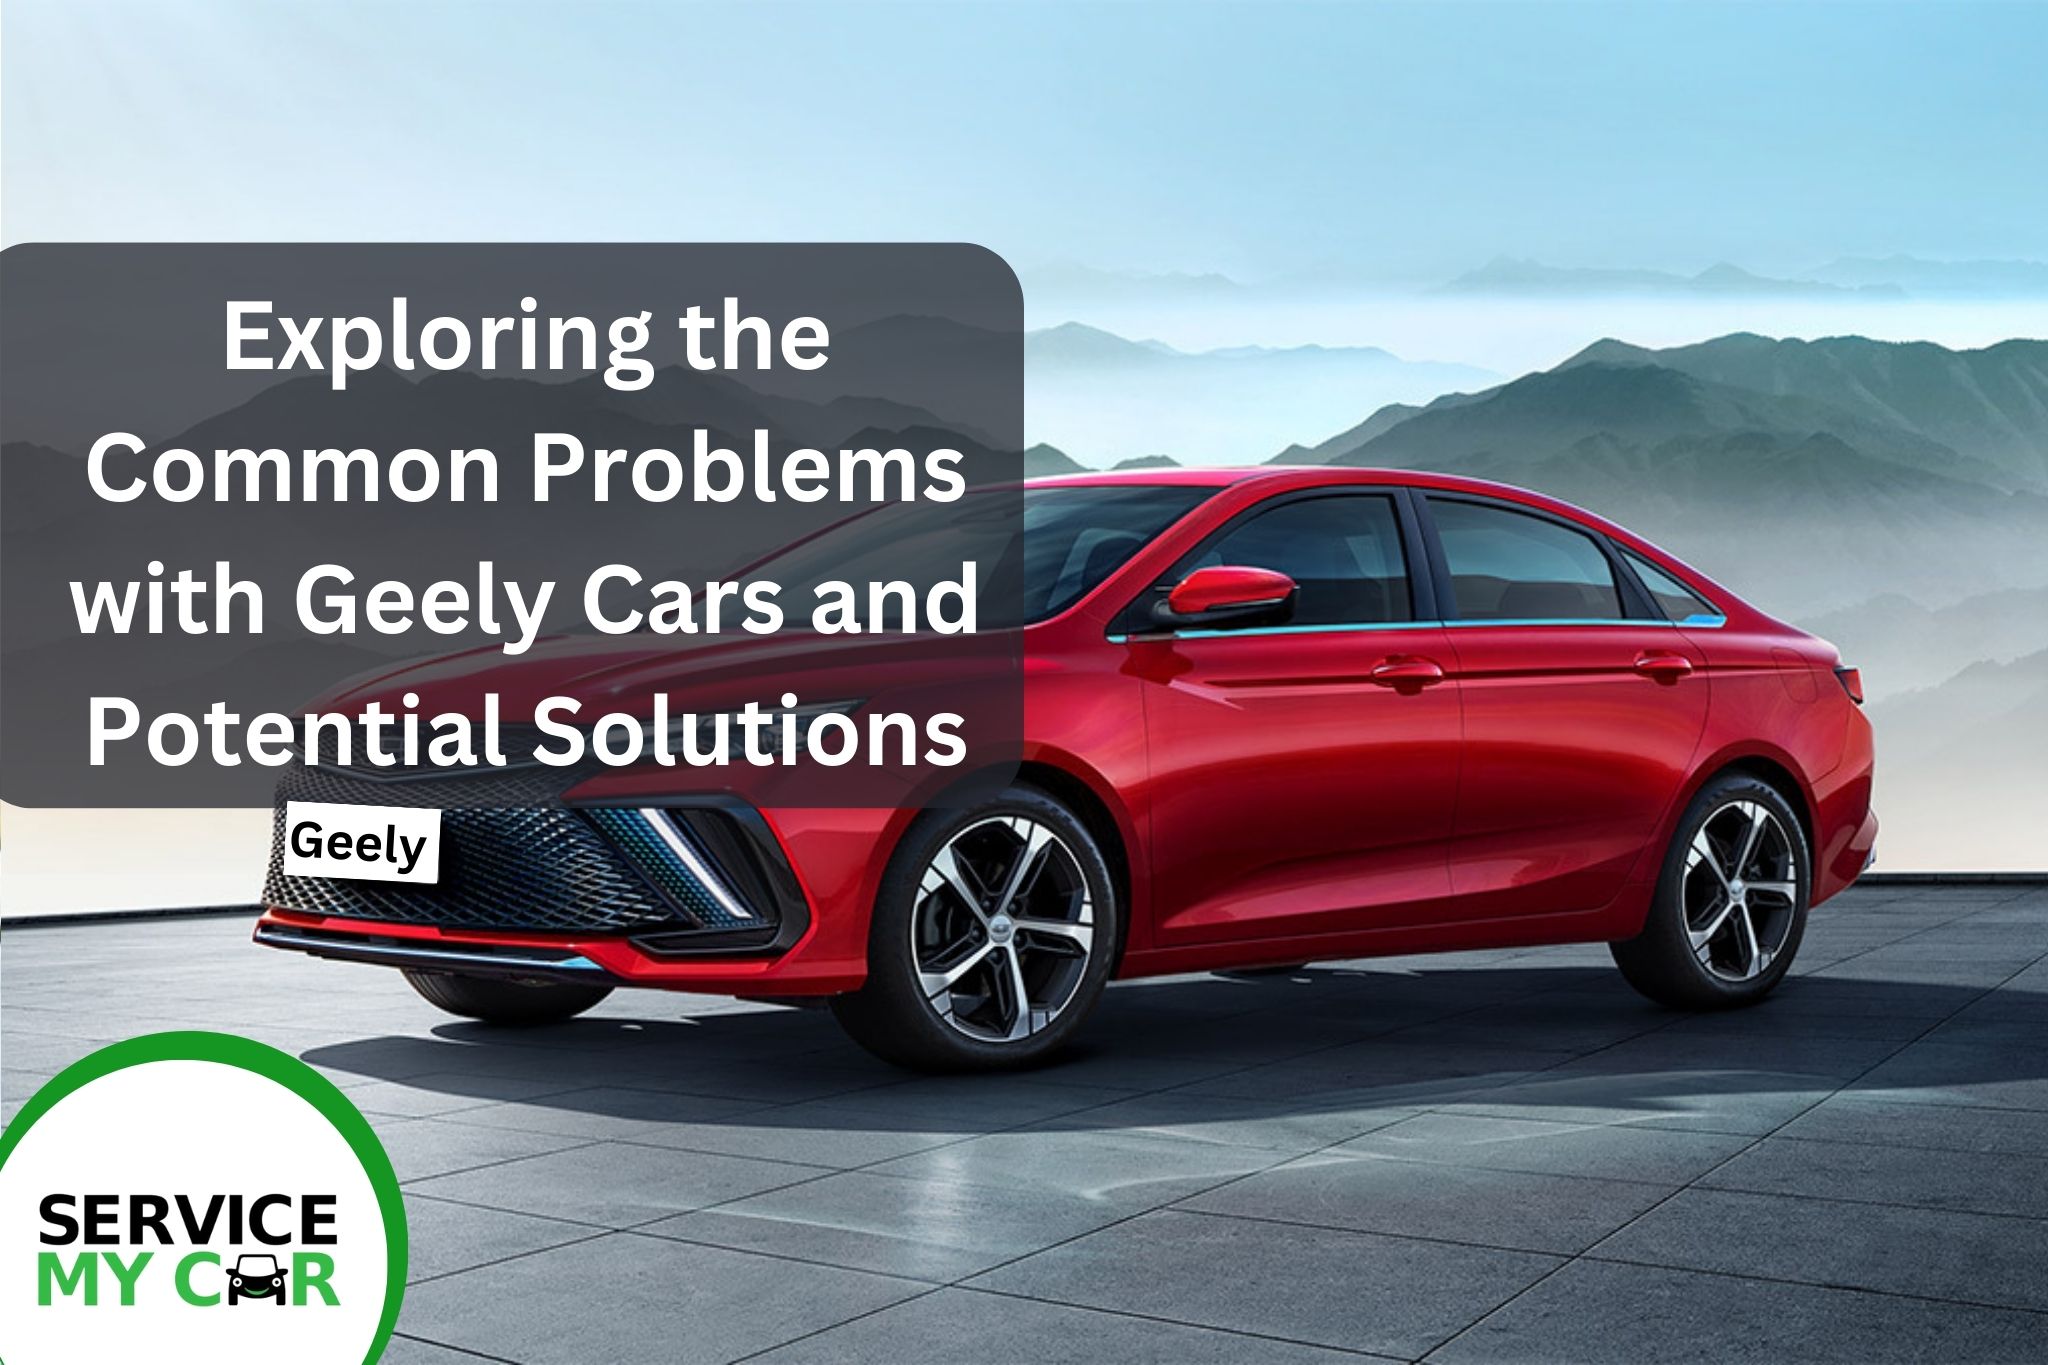 Exploring the Common Problems with Geely Cars and Potential Solutions